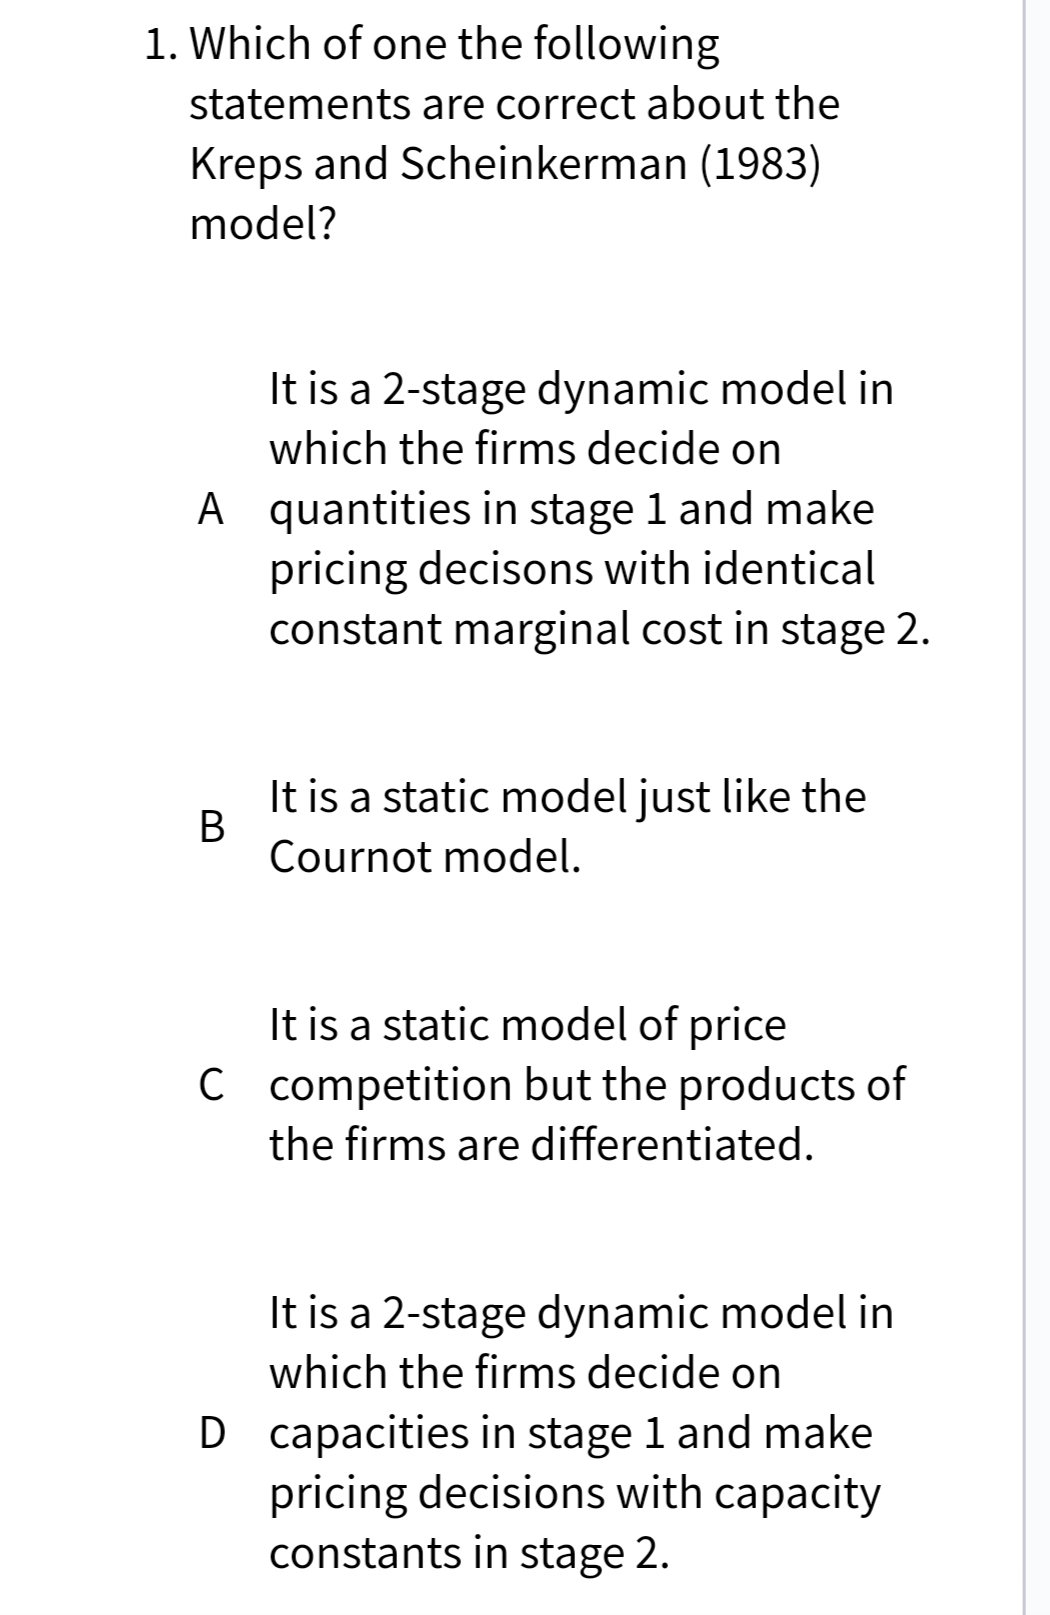 1. Which of one the following
statements are correct about the
Kreps and Scheinkerman (1983)
model?
It is a 2-stage dynamic model in
which the firms decide on
A quantities in stage 1 and make
pricing decisons with identical
constant marginal cost in stage 2.
It is a static model just like the
Cournot model.
It is a static model of price
C competition but the products of
the firms are differentiated.
It is a 2-stage dynamic model in
which the firms decide on
D capacities in stage 1 and make
pricing decisions with capacity
constants in stage 2.
